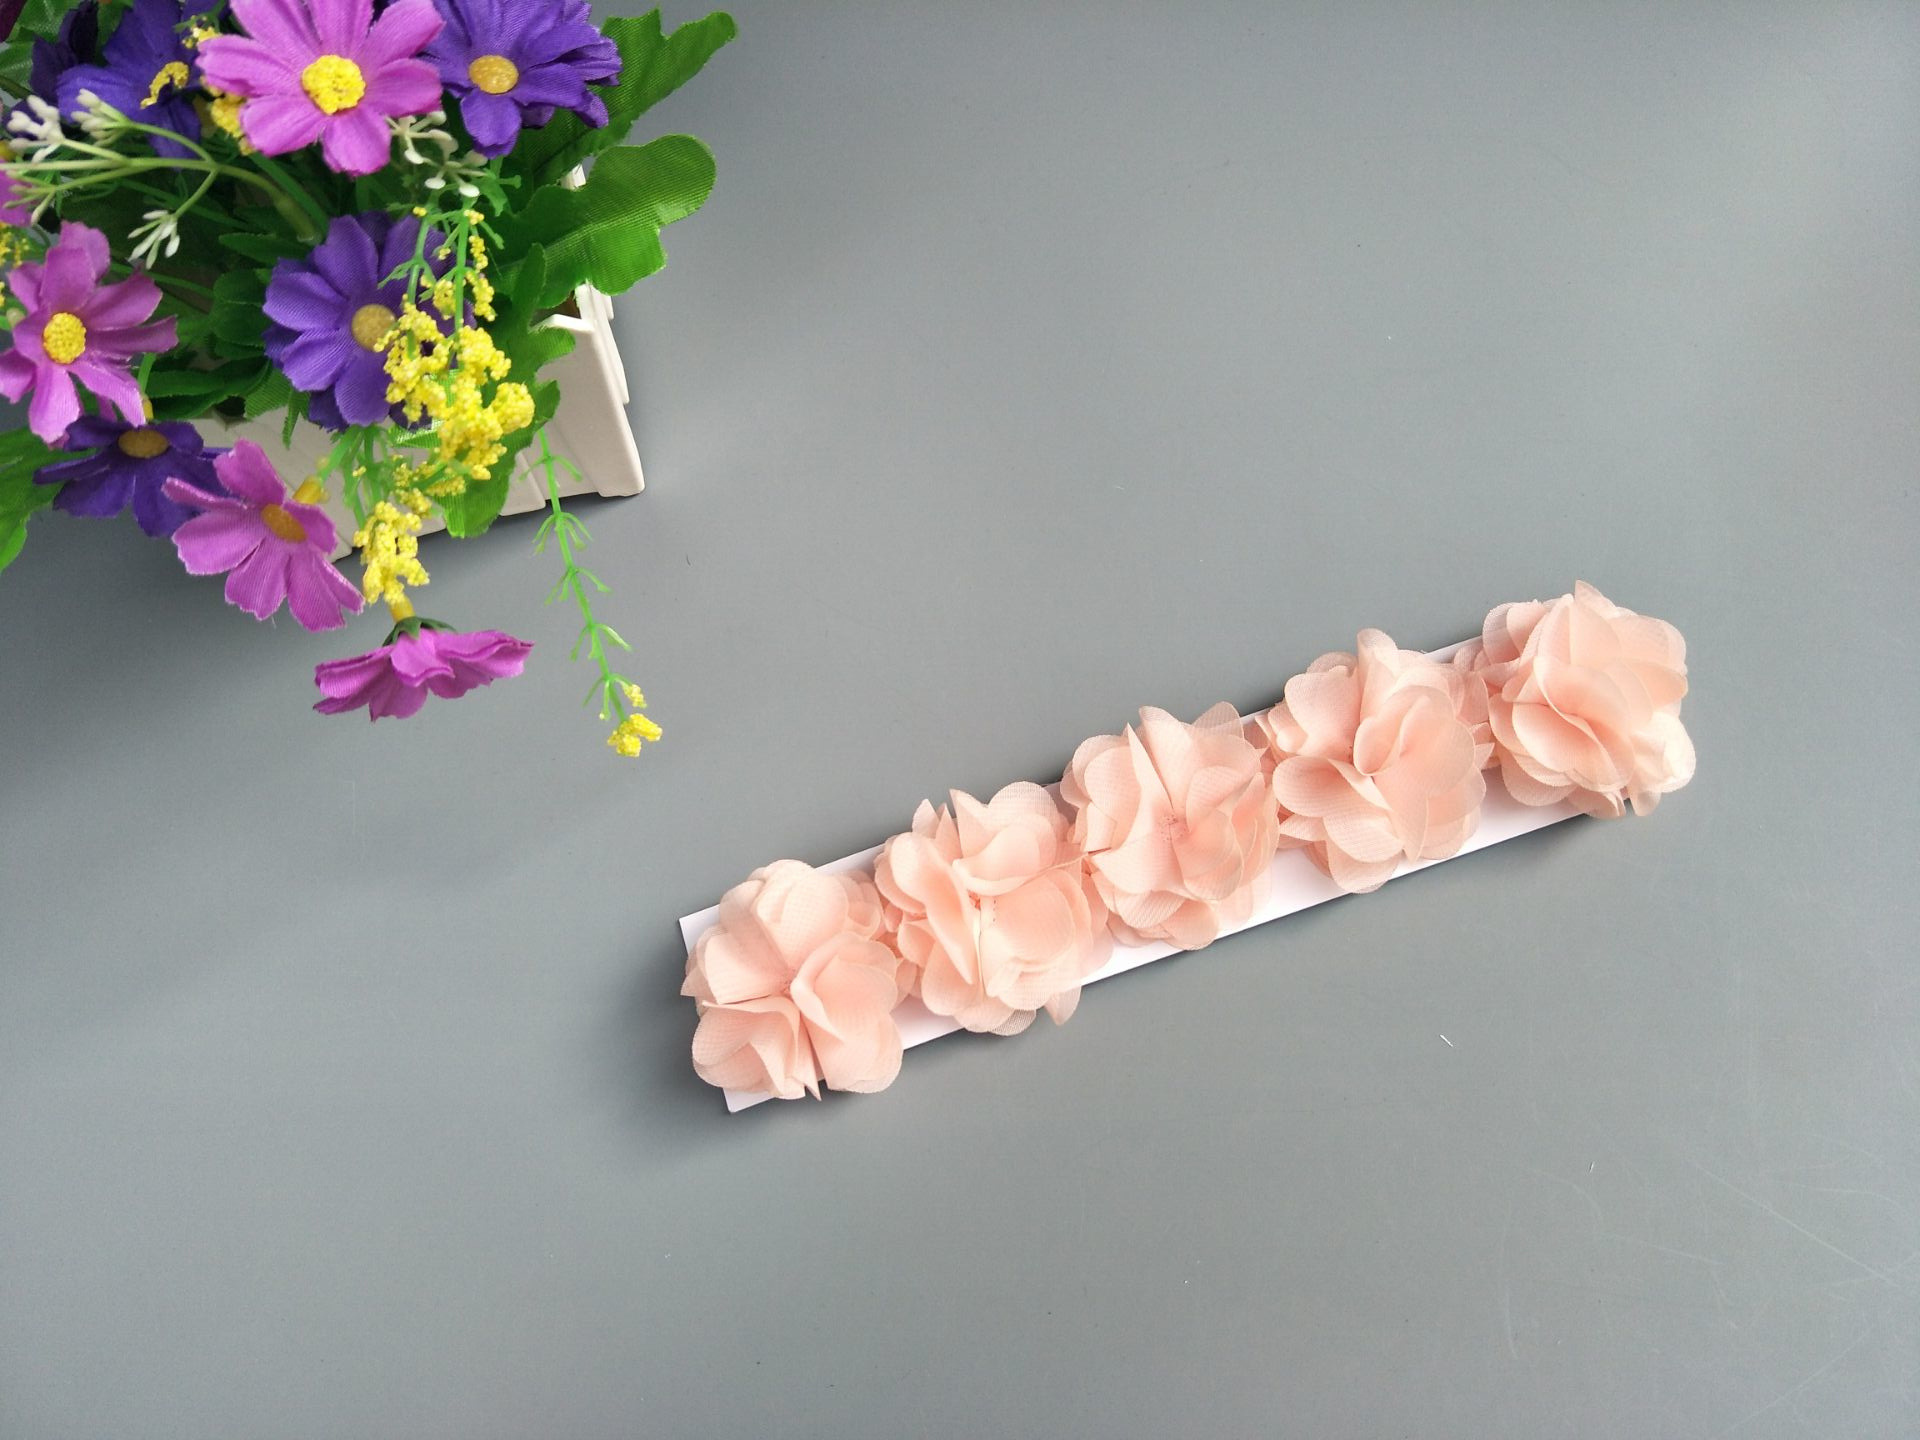 2019 New Lace Flower Kids Baby Girl Toddler Headband Hair Band Headwear Accessories Lace Flower Headband Baby Photo Props